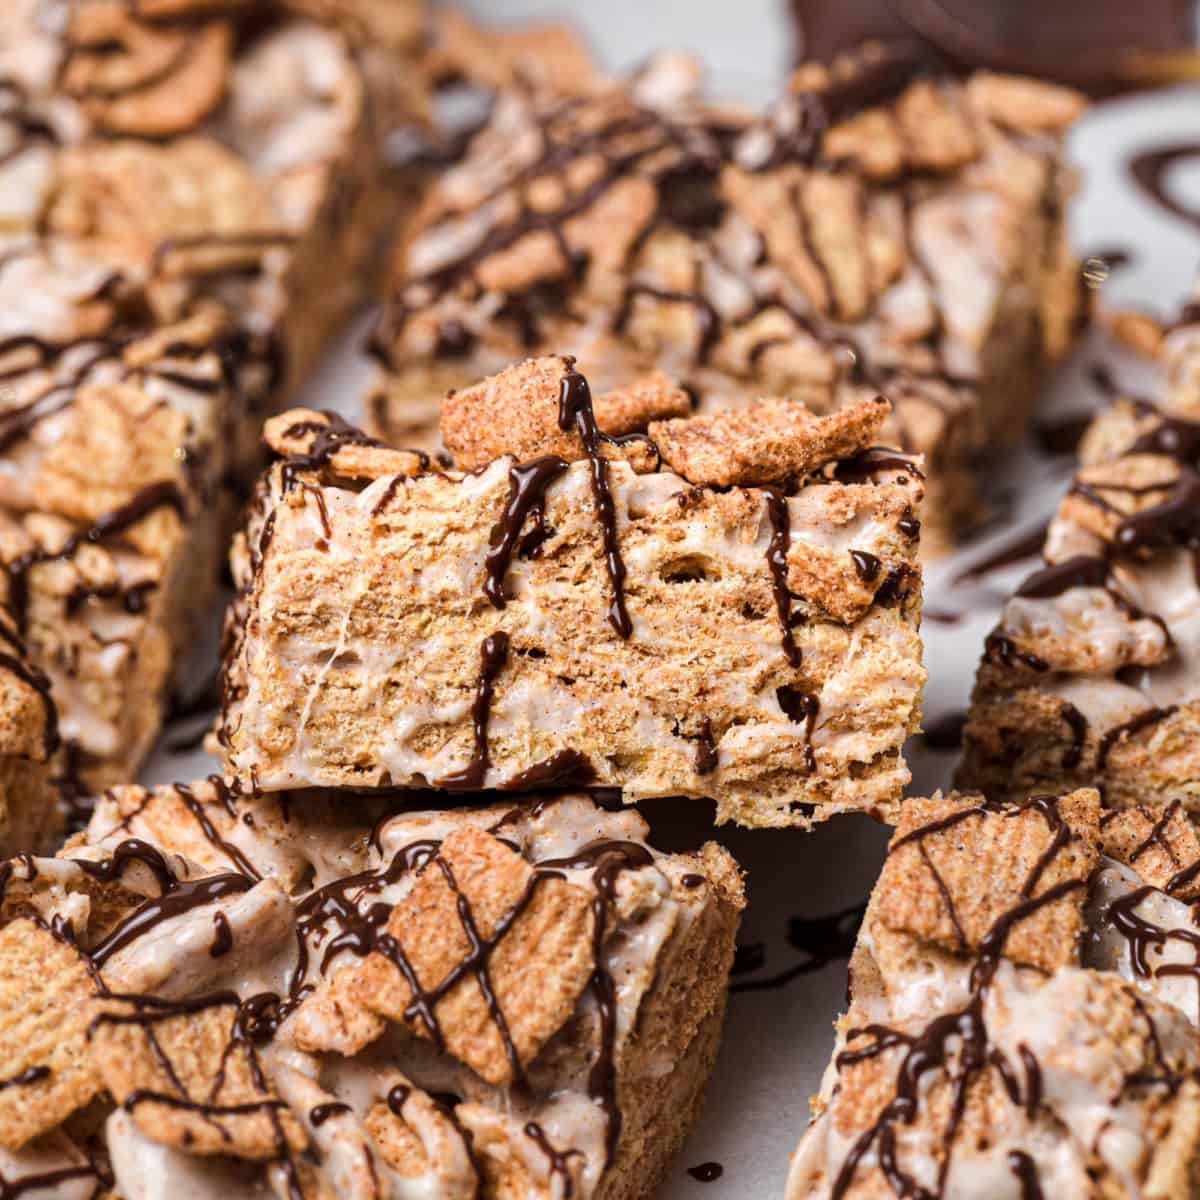 A pile of cinnamon bars on a table ready to eat.